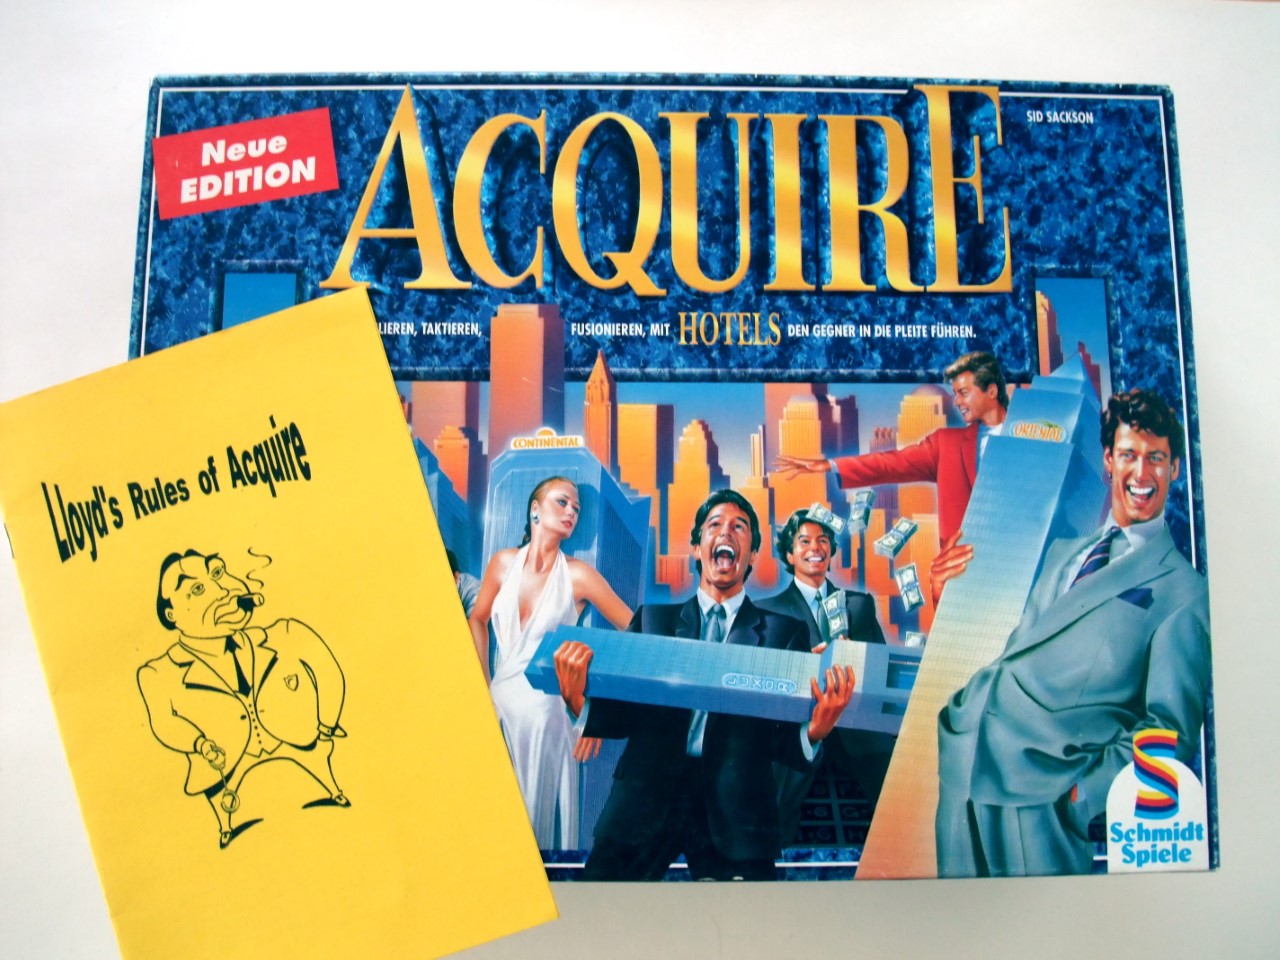 1997 ACQUIRE Game Box with Lloyd's Rules of ACQUIRE (Photo courtesy of Felix Schellenberg)